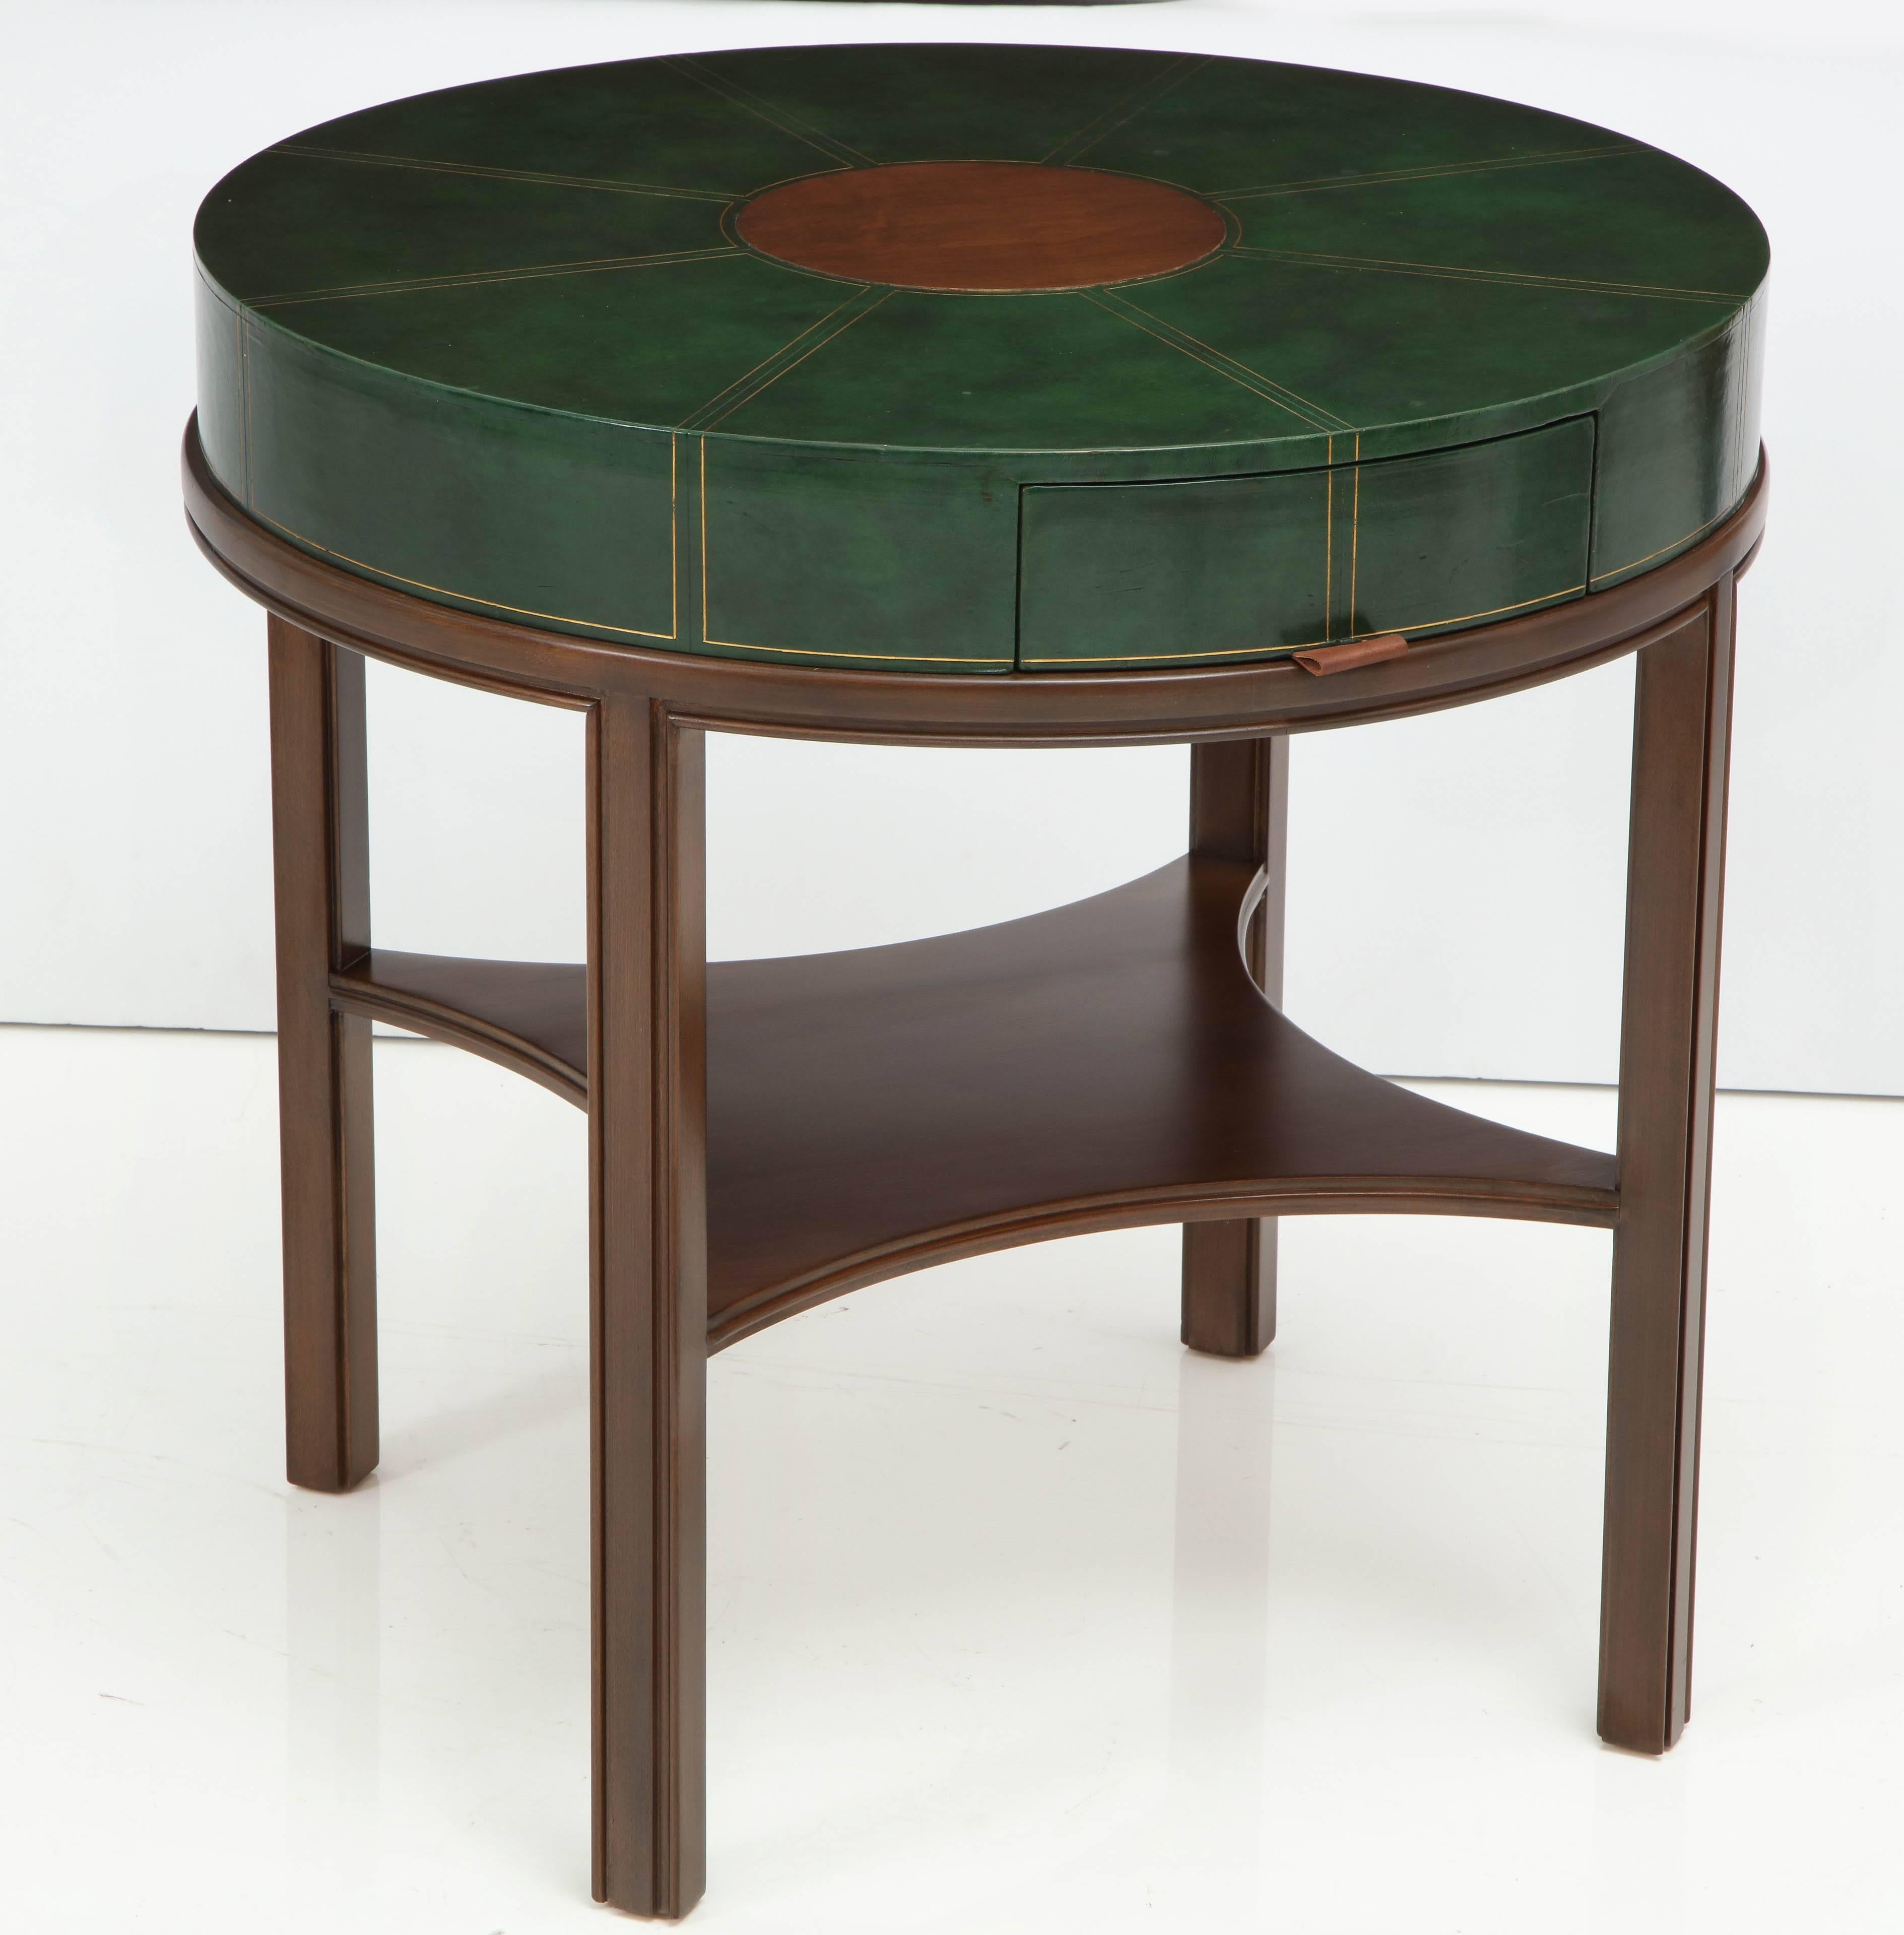 Midcentury walnut lamp table featuring a forest green leather top with hand tooled pinstripe accents with a walnut disc centre and a hidden drawer with a simple leather tab. Mint restored, with slight wear to leather. Label inside drawer.